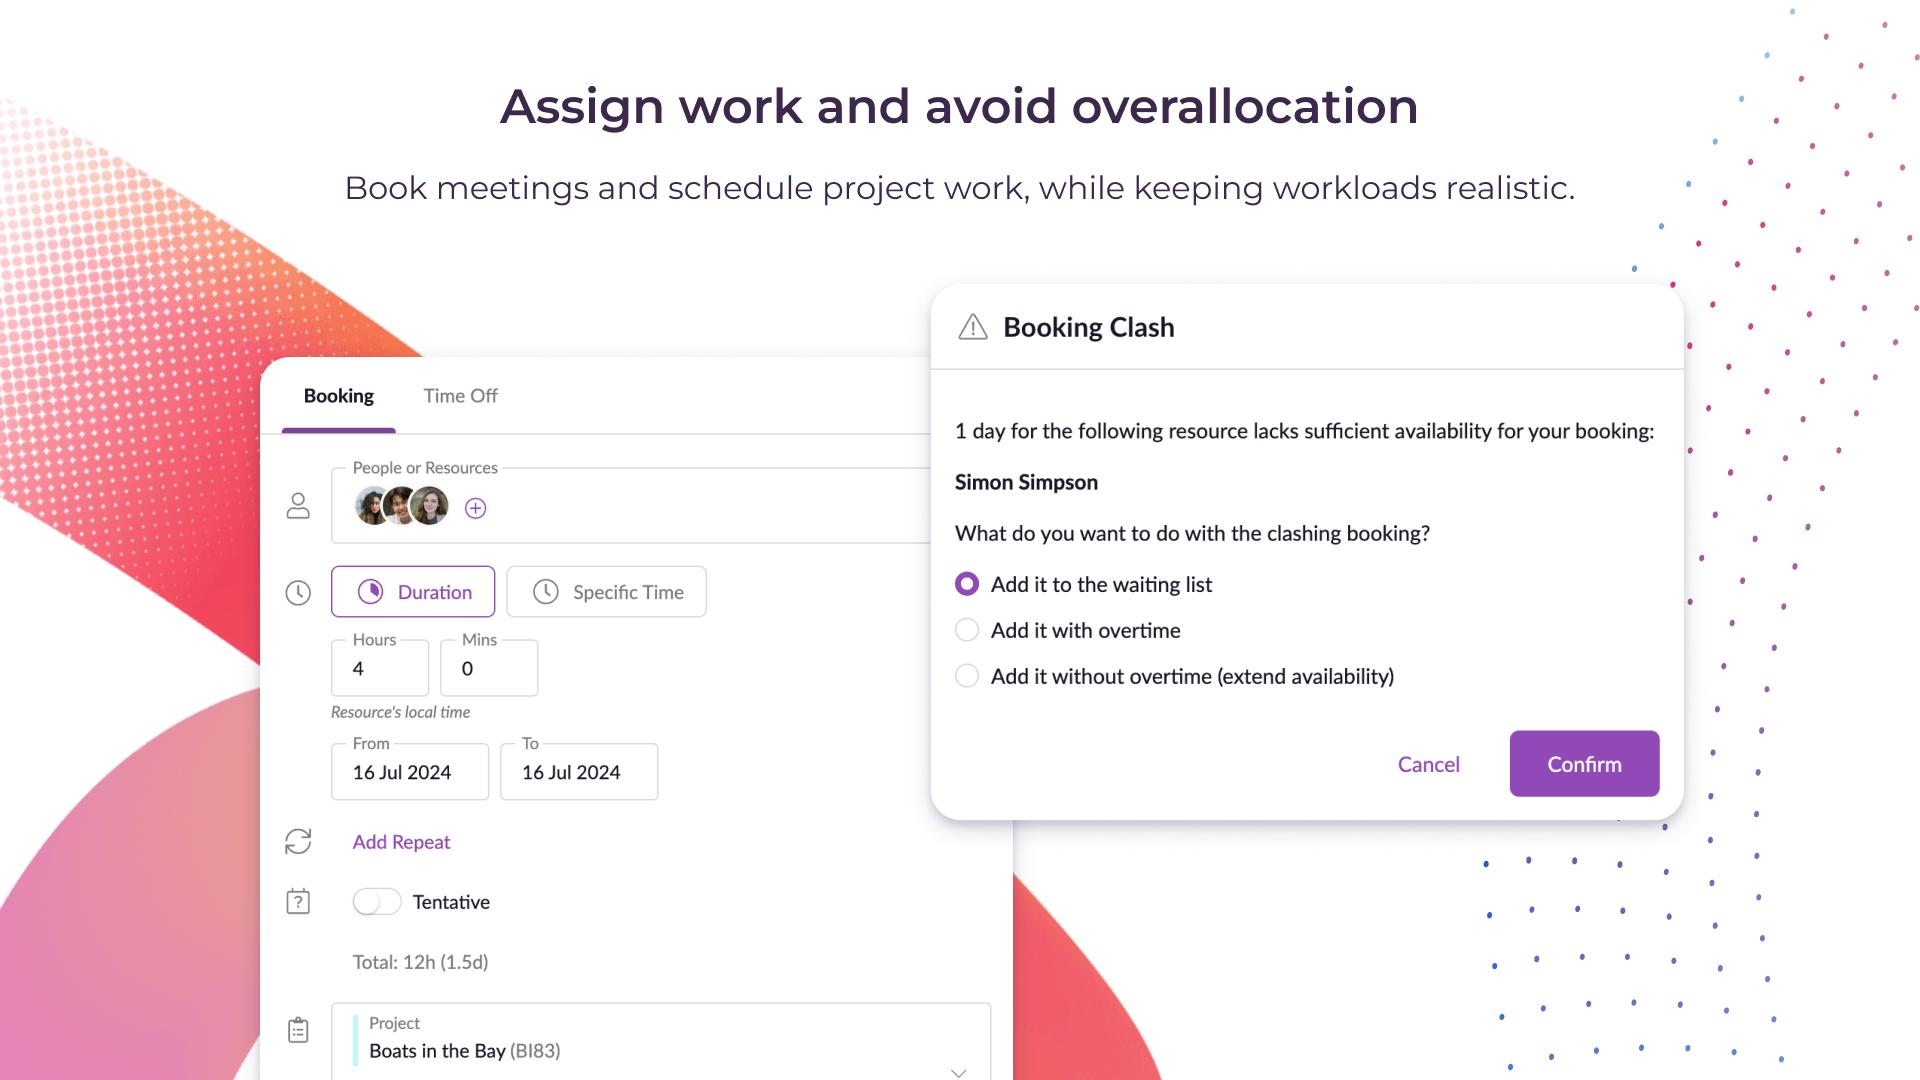 Assign work and avoid overallocation. Book meetings and schedule project work, while keeping workloads realistic.